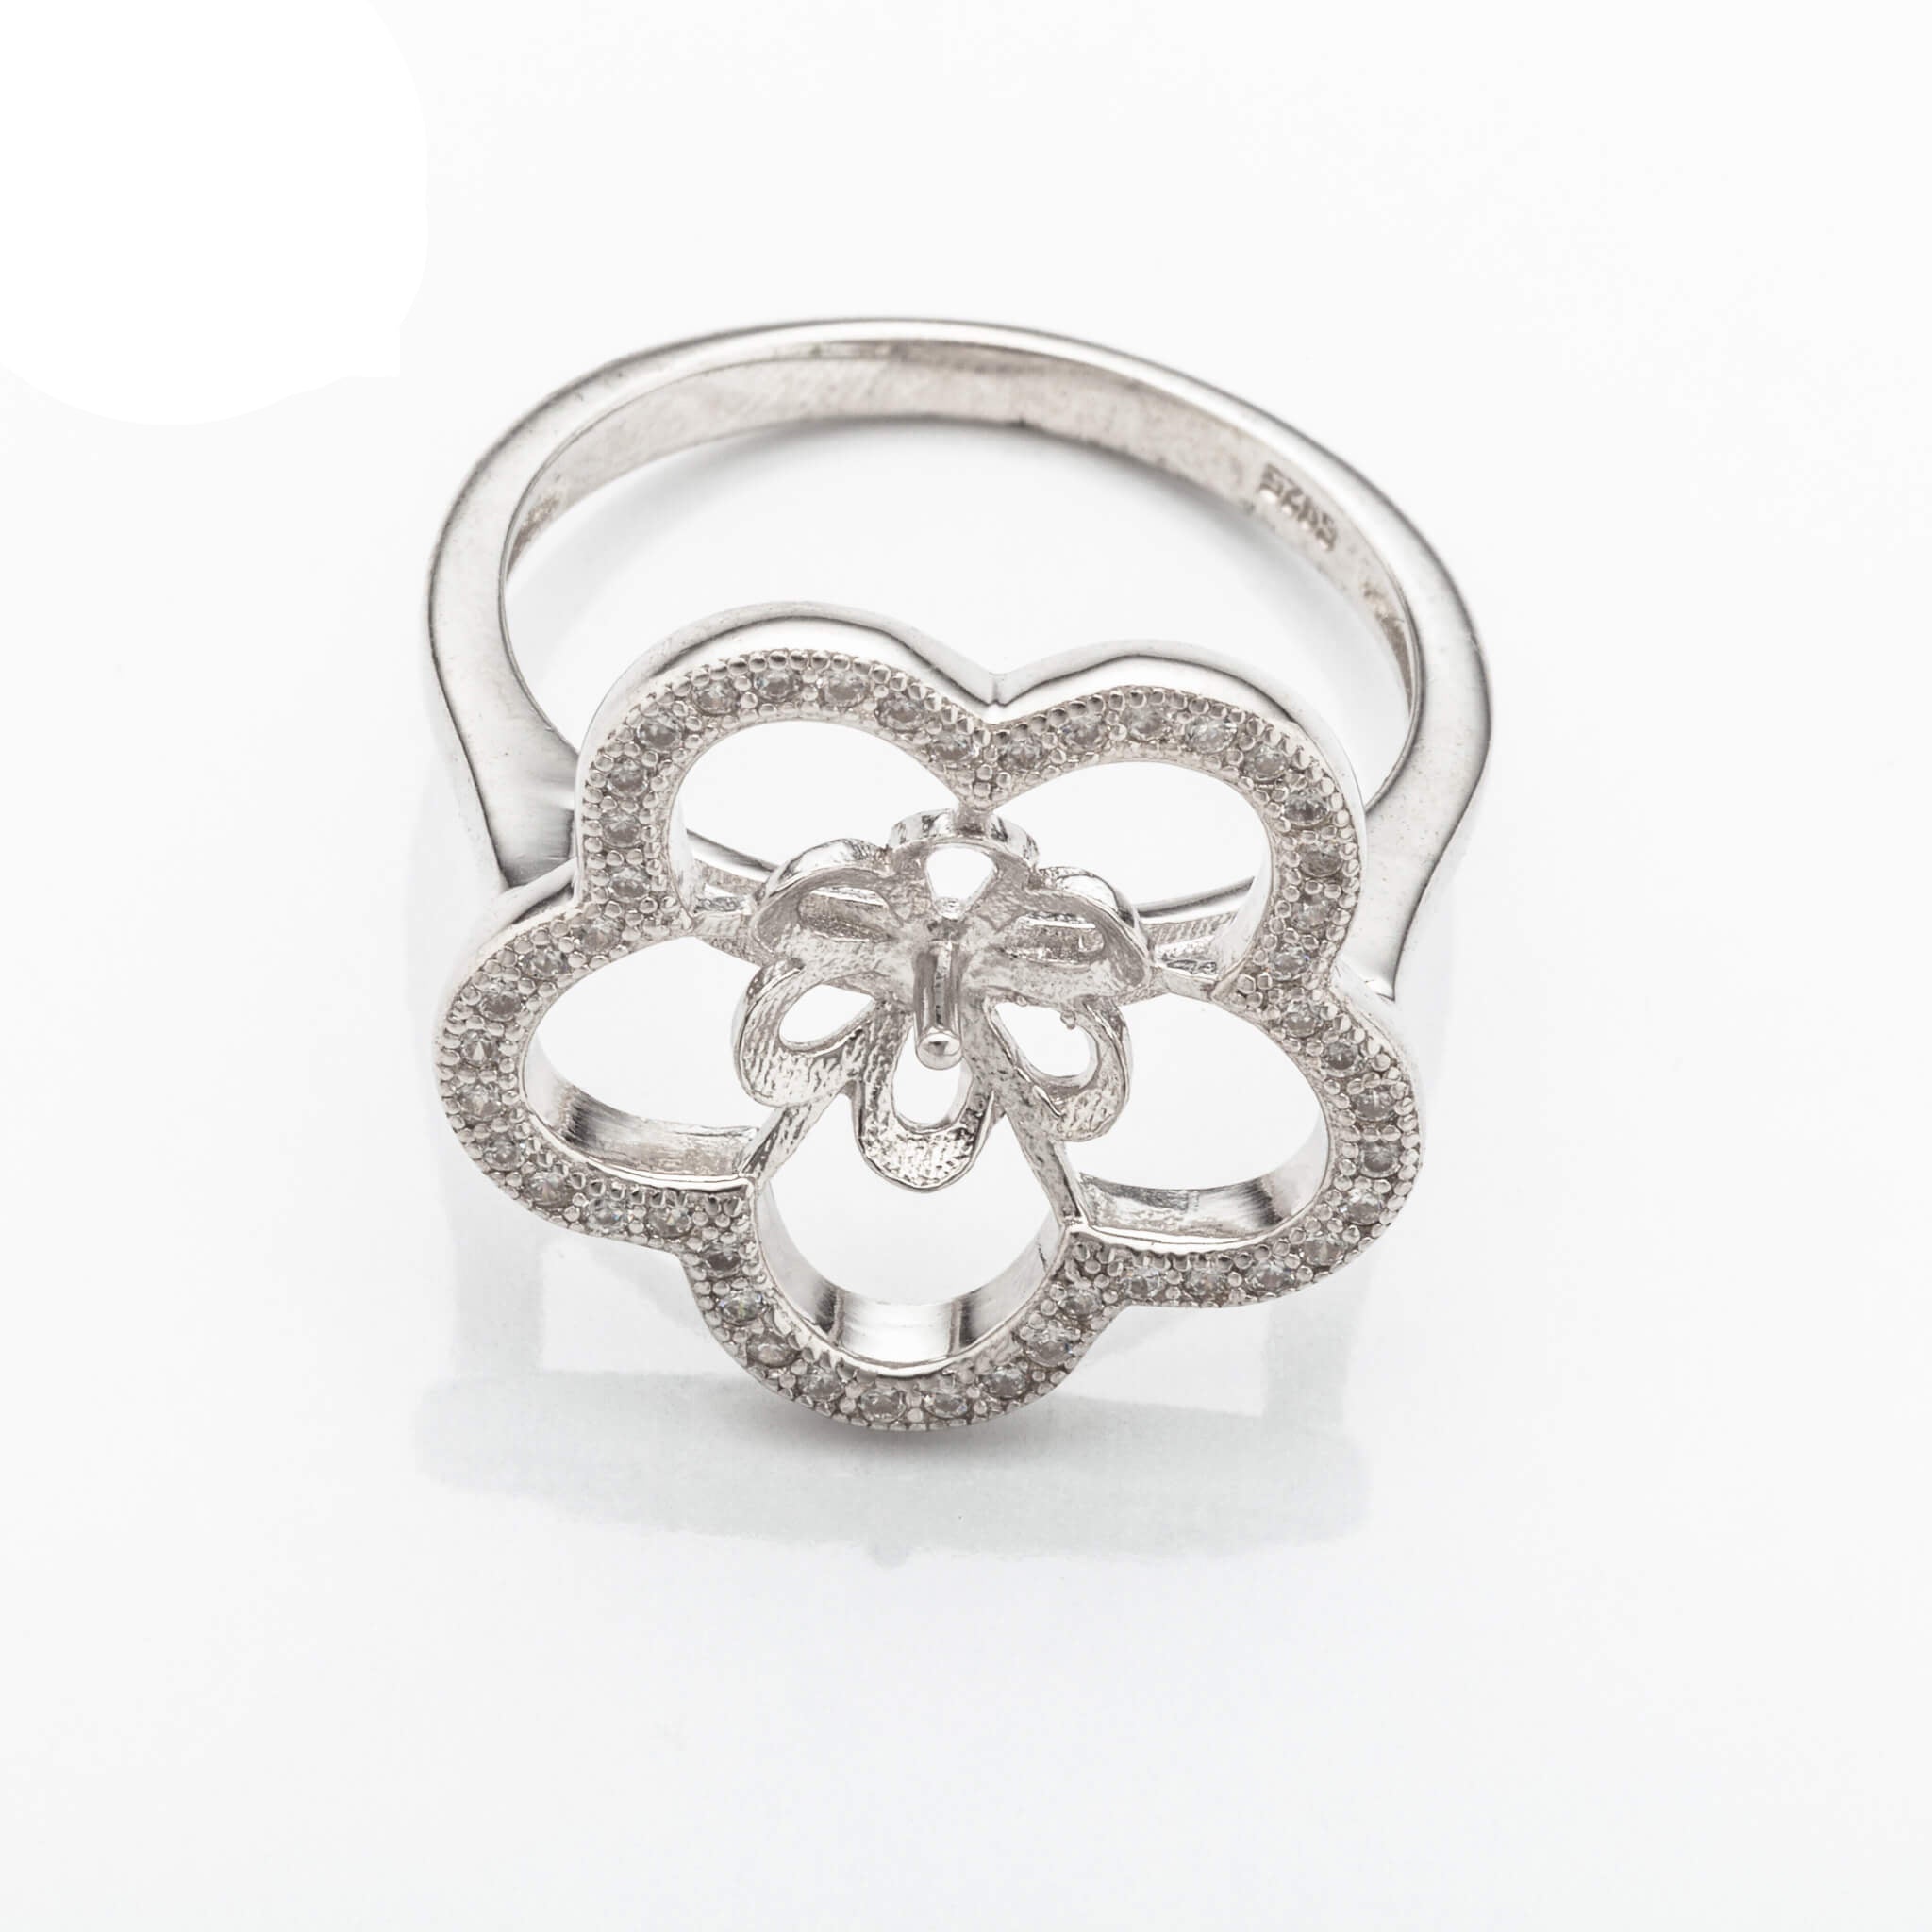 Flower Ring with Cub Zirconia Inlays and Cup and Peg Mounting in Sterling Silver 9mm